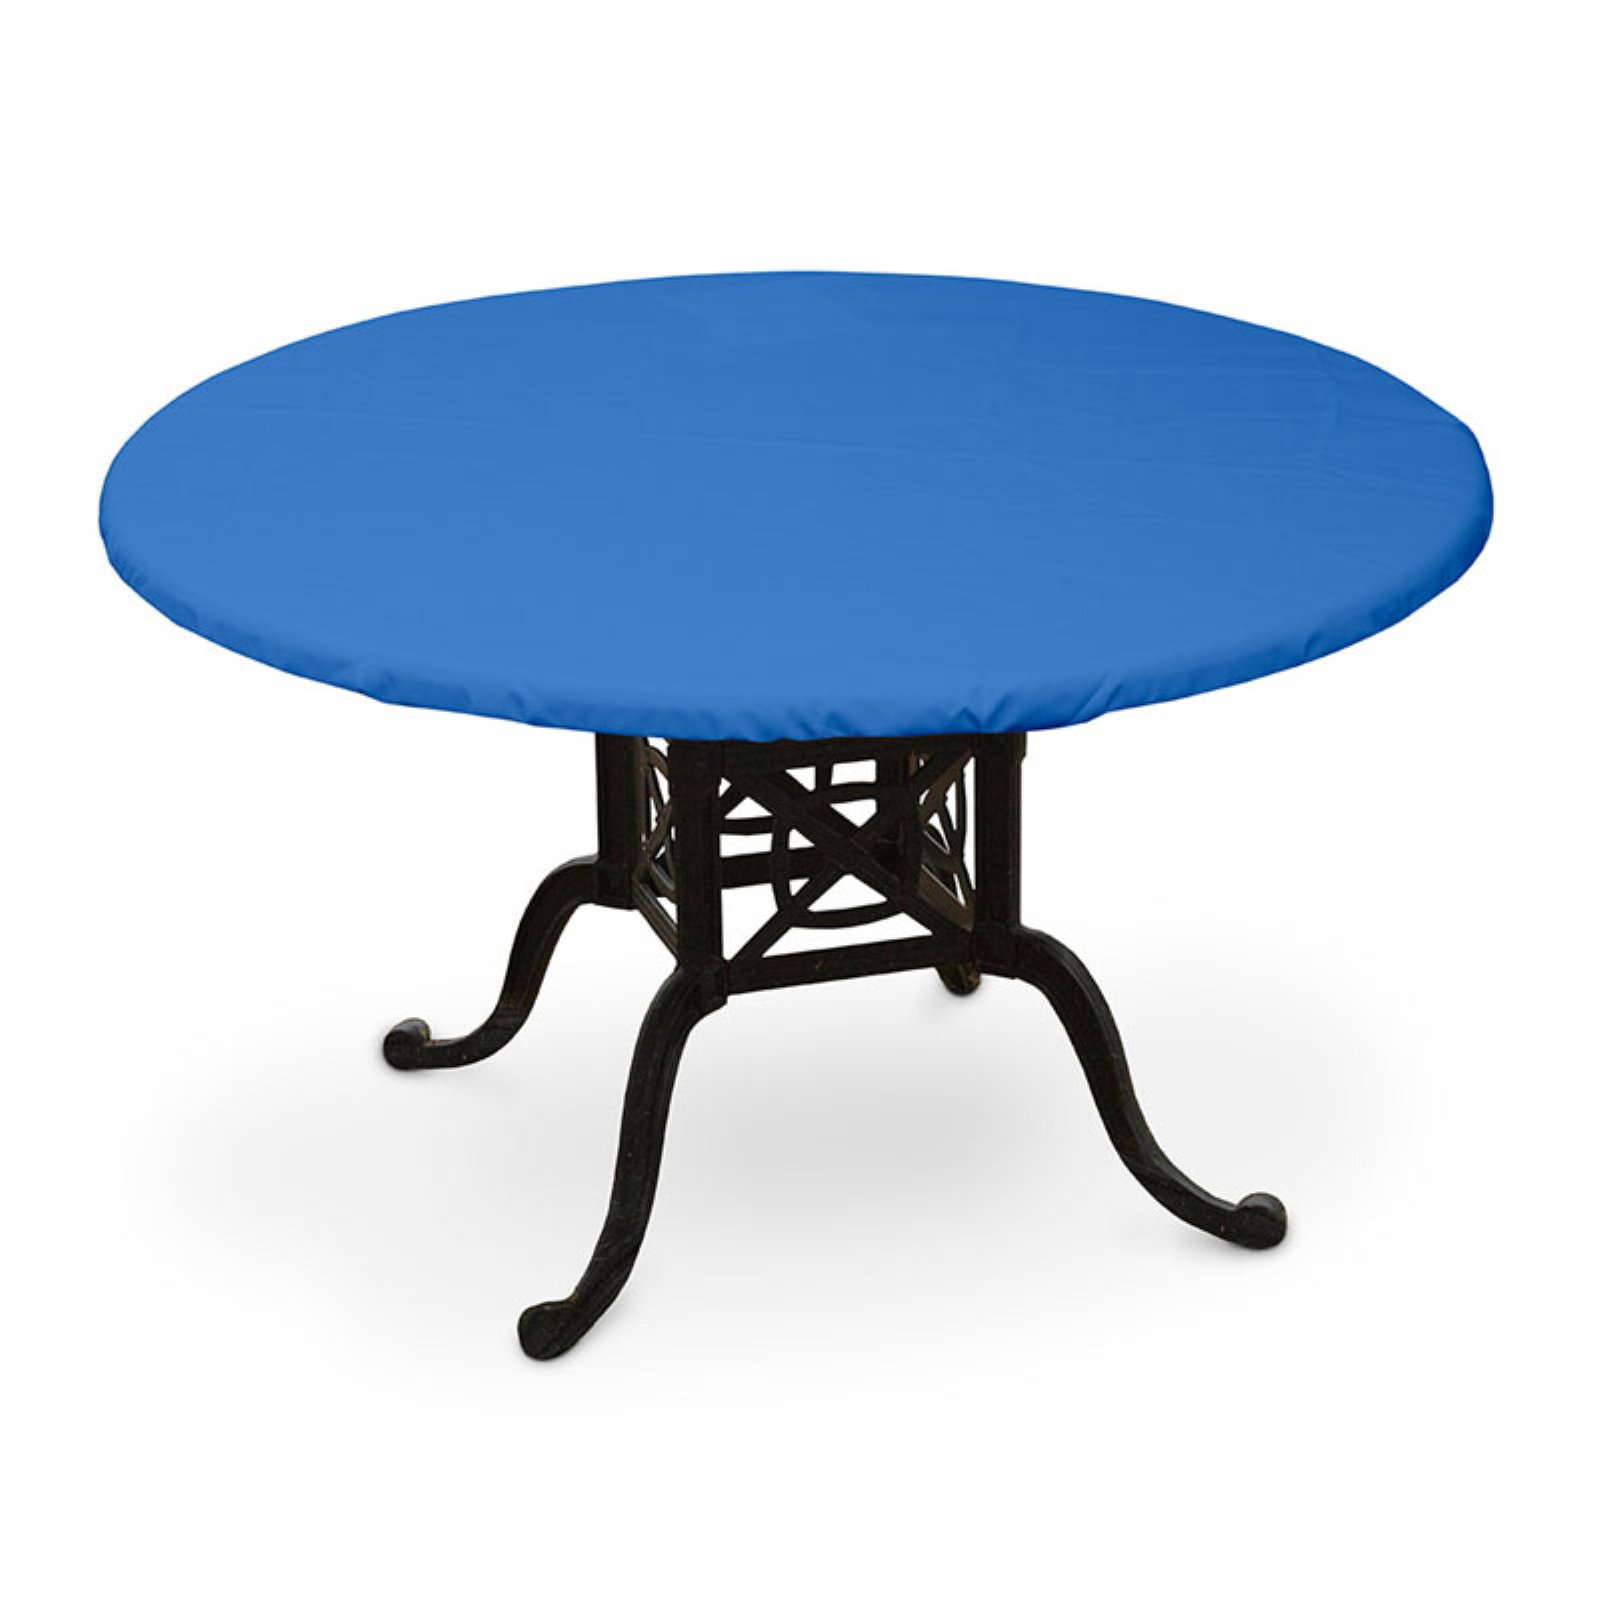 KoverRoos Weathermax Round Dining Table Top Cover - image 1 of 2